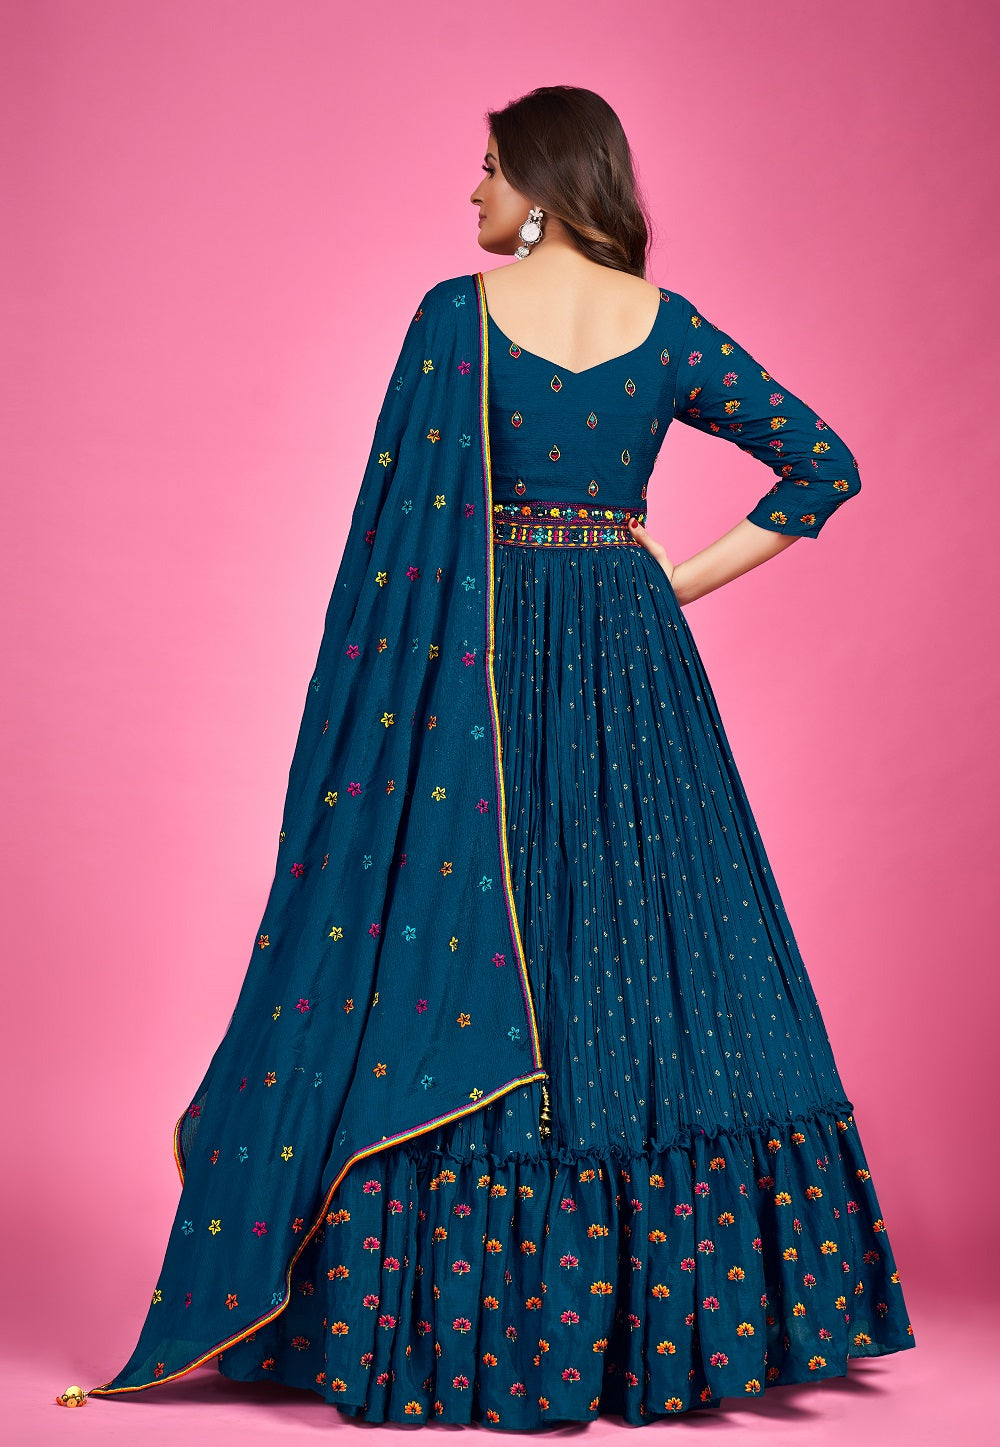 Chinon Chiffon Embroidered Abaya Style Suit in Teal Blue